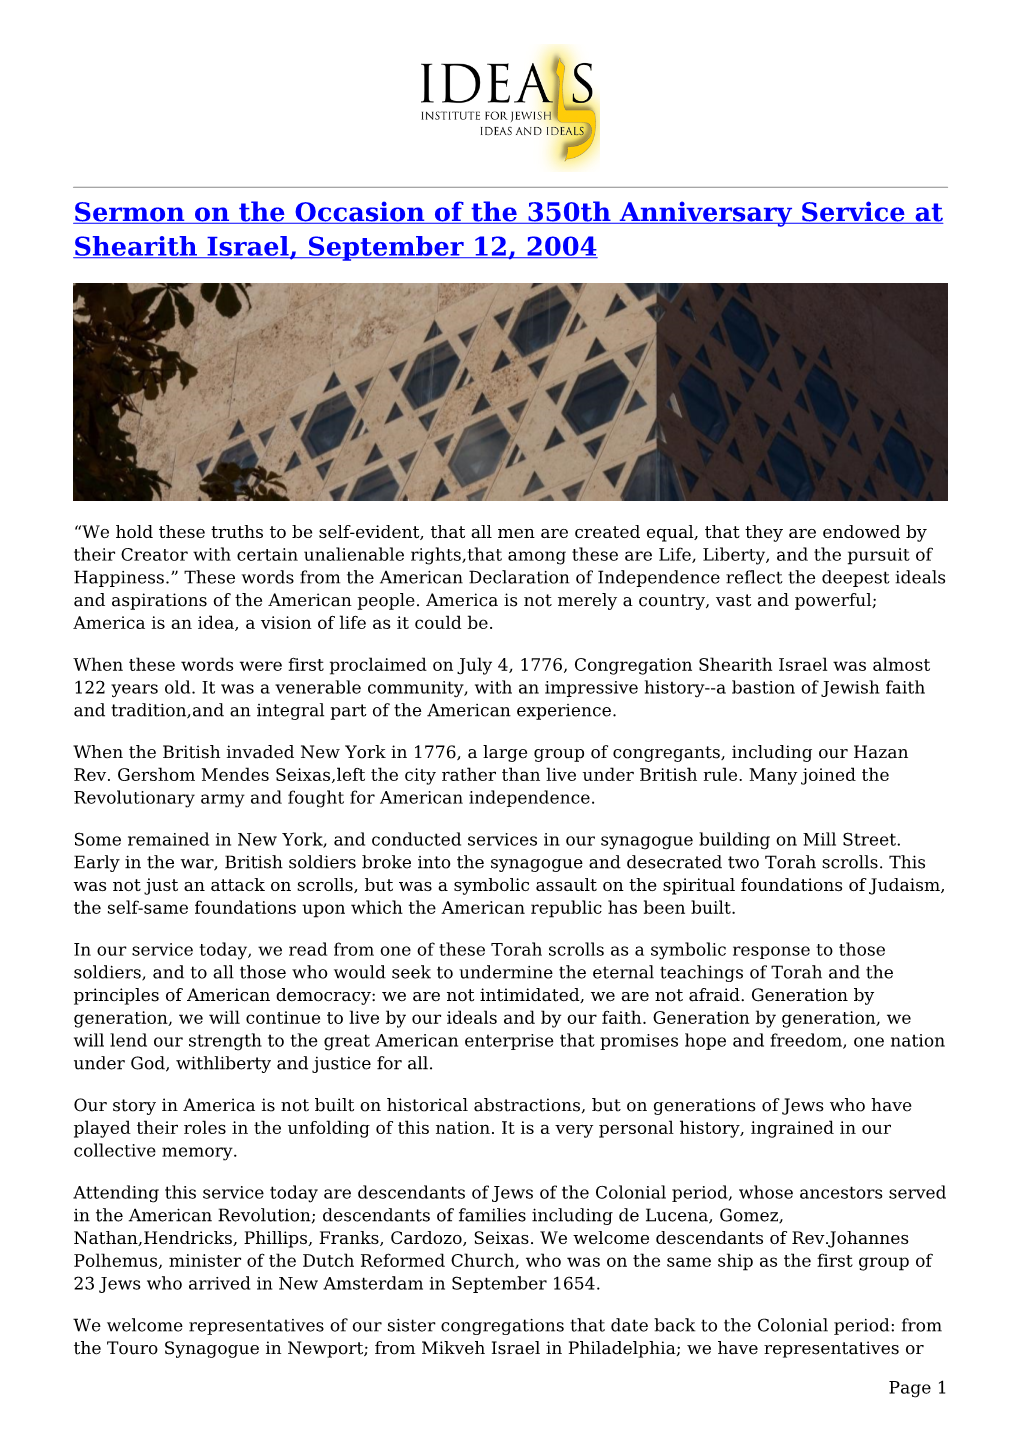 Sermon on the Occasion of the 350Th Anniversary Service at Shearith Israel, September 12, 2004